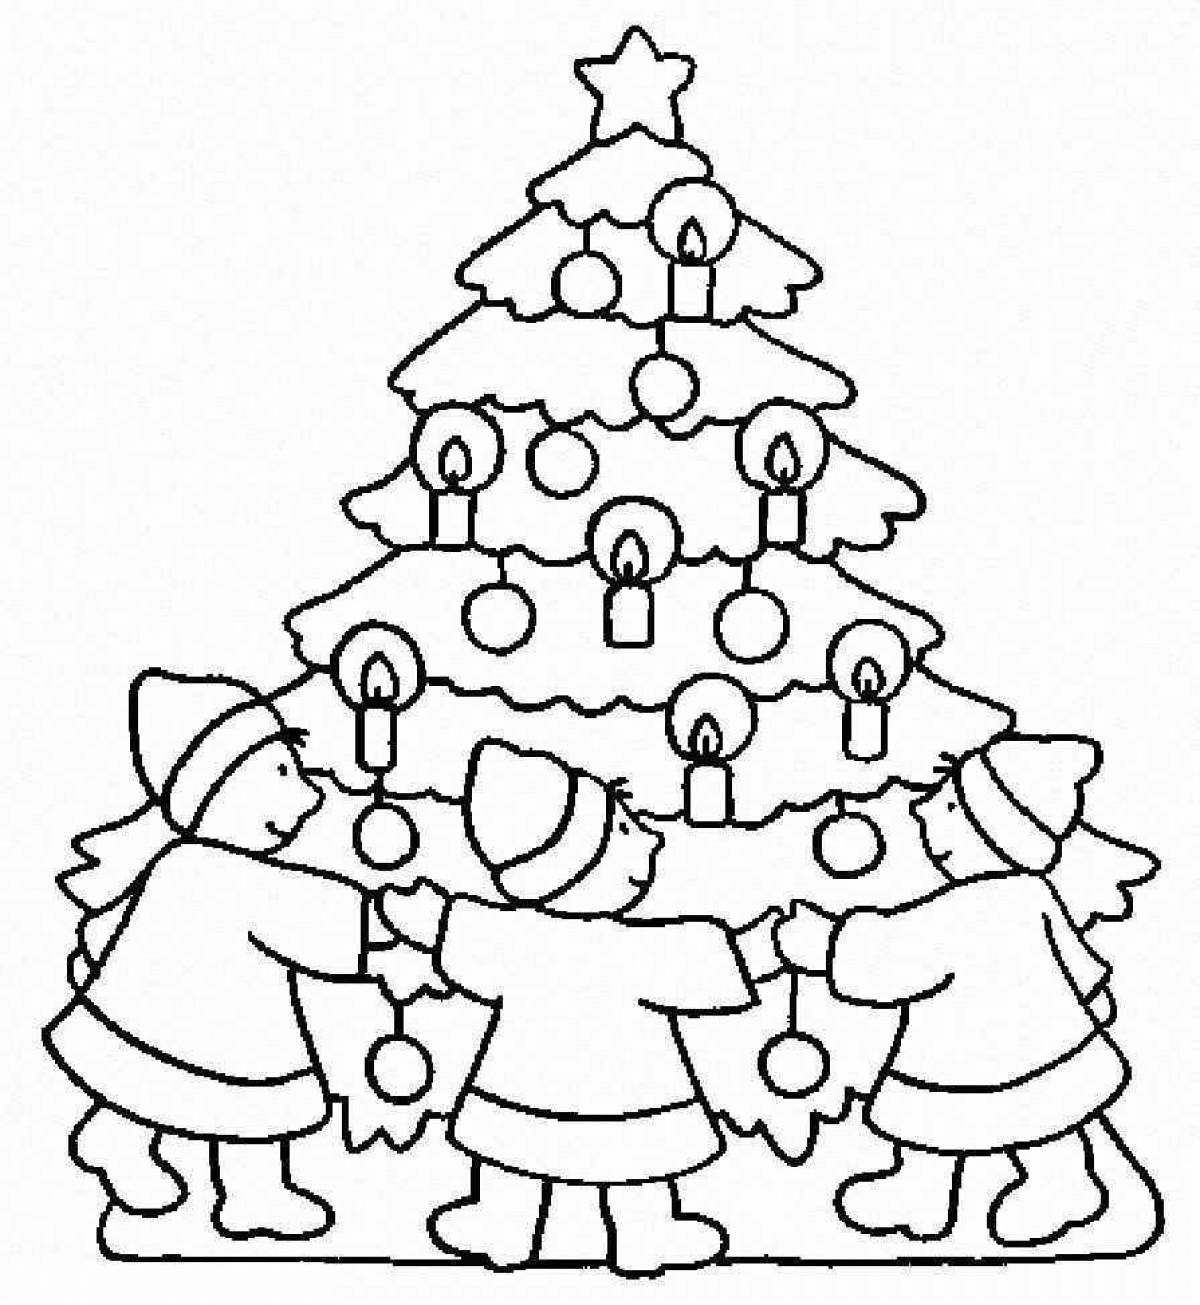 A jubilant round dance coloring pages for children